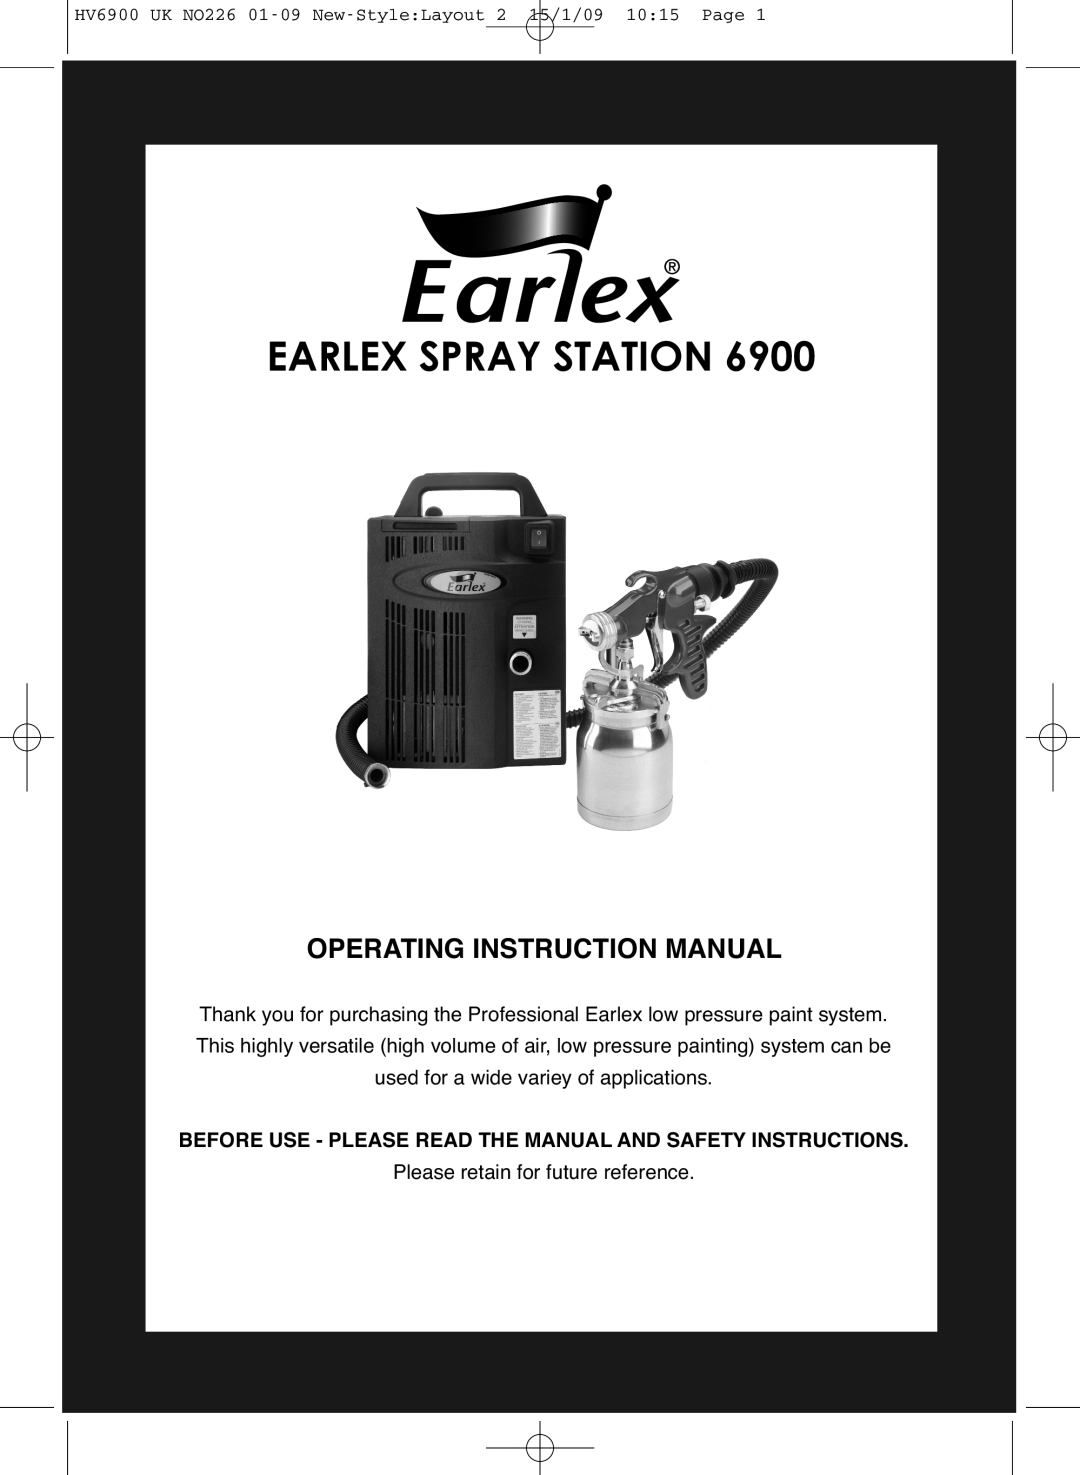 Earlex 6900 instruction manual Earlex Spraystation, Operating Instruction Manual, Please retain for future reference 